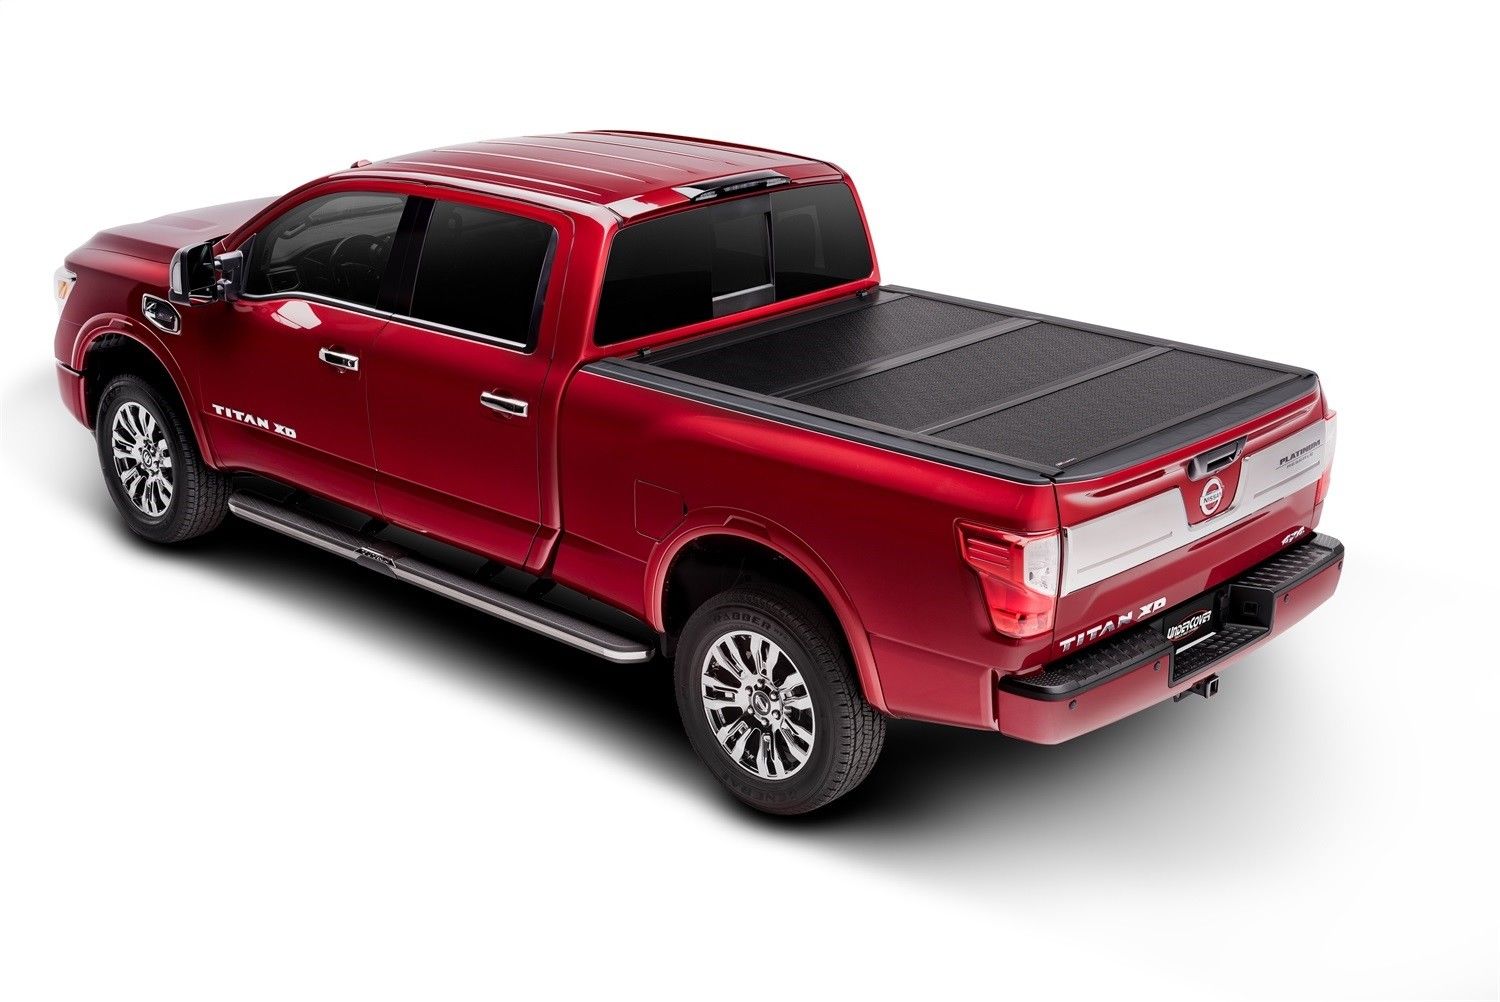 undercover truck bed covers